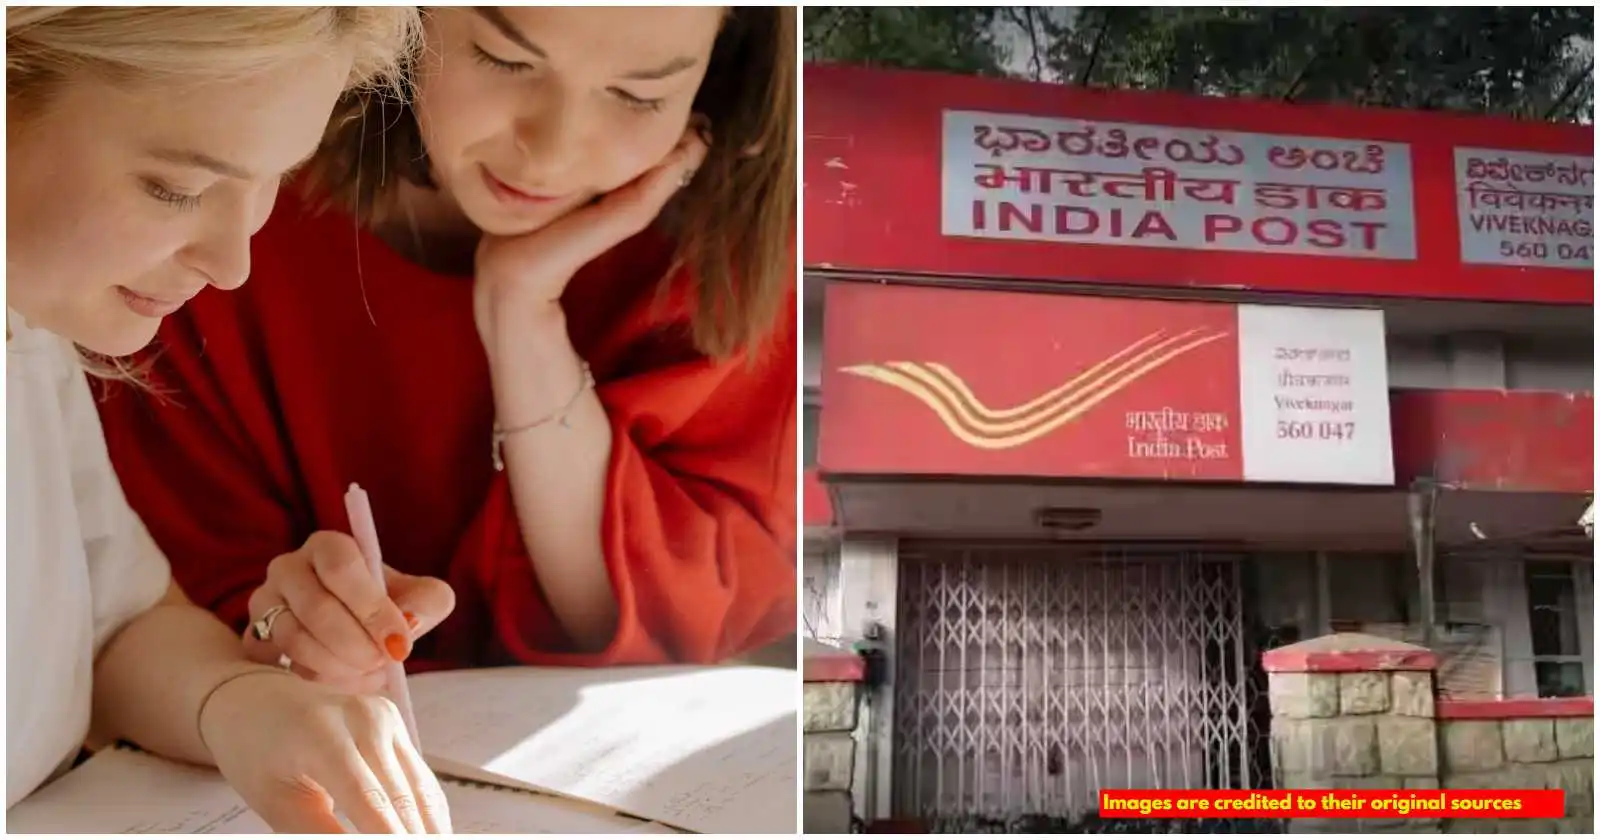 Post office Jobs opening details: Eligibility, Documents and salary details explained.